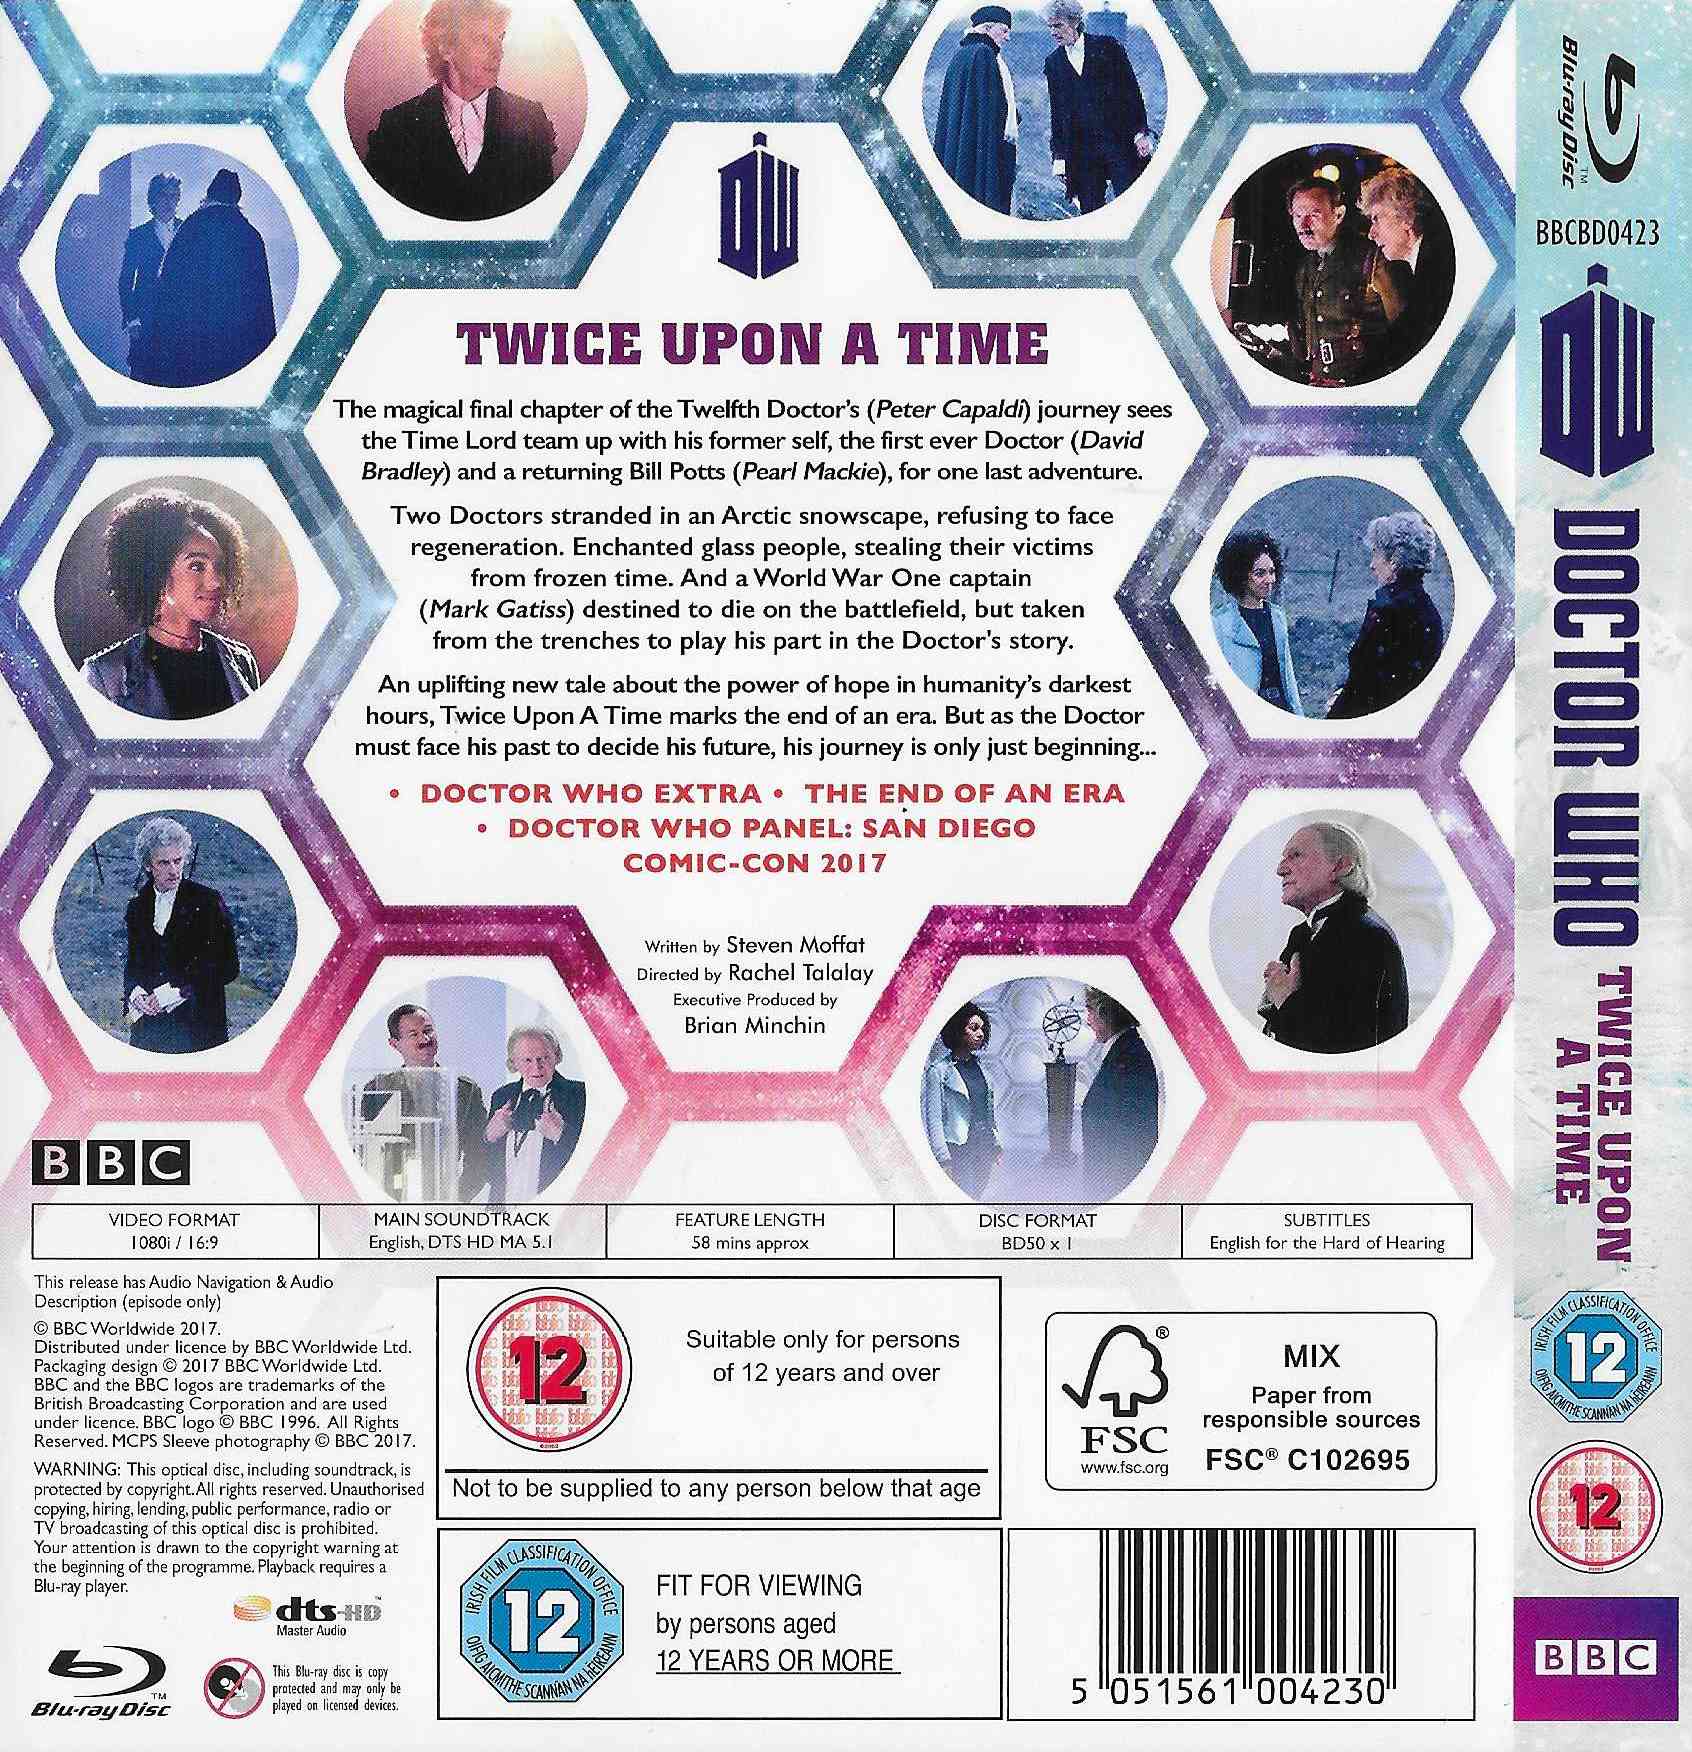 Back cover of BBCUHD 0456